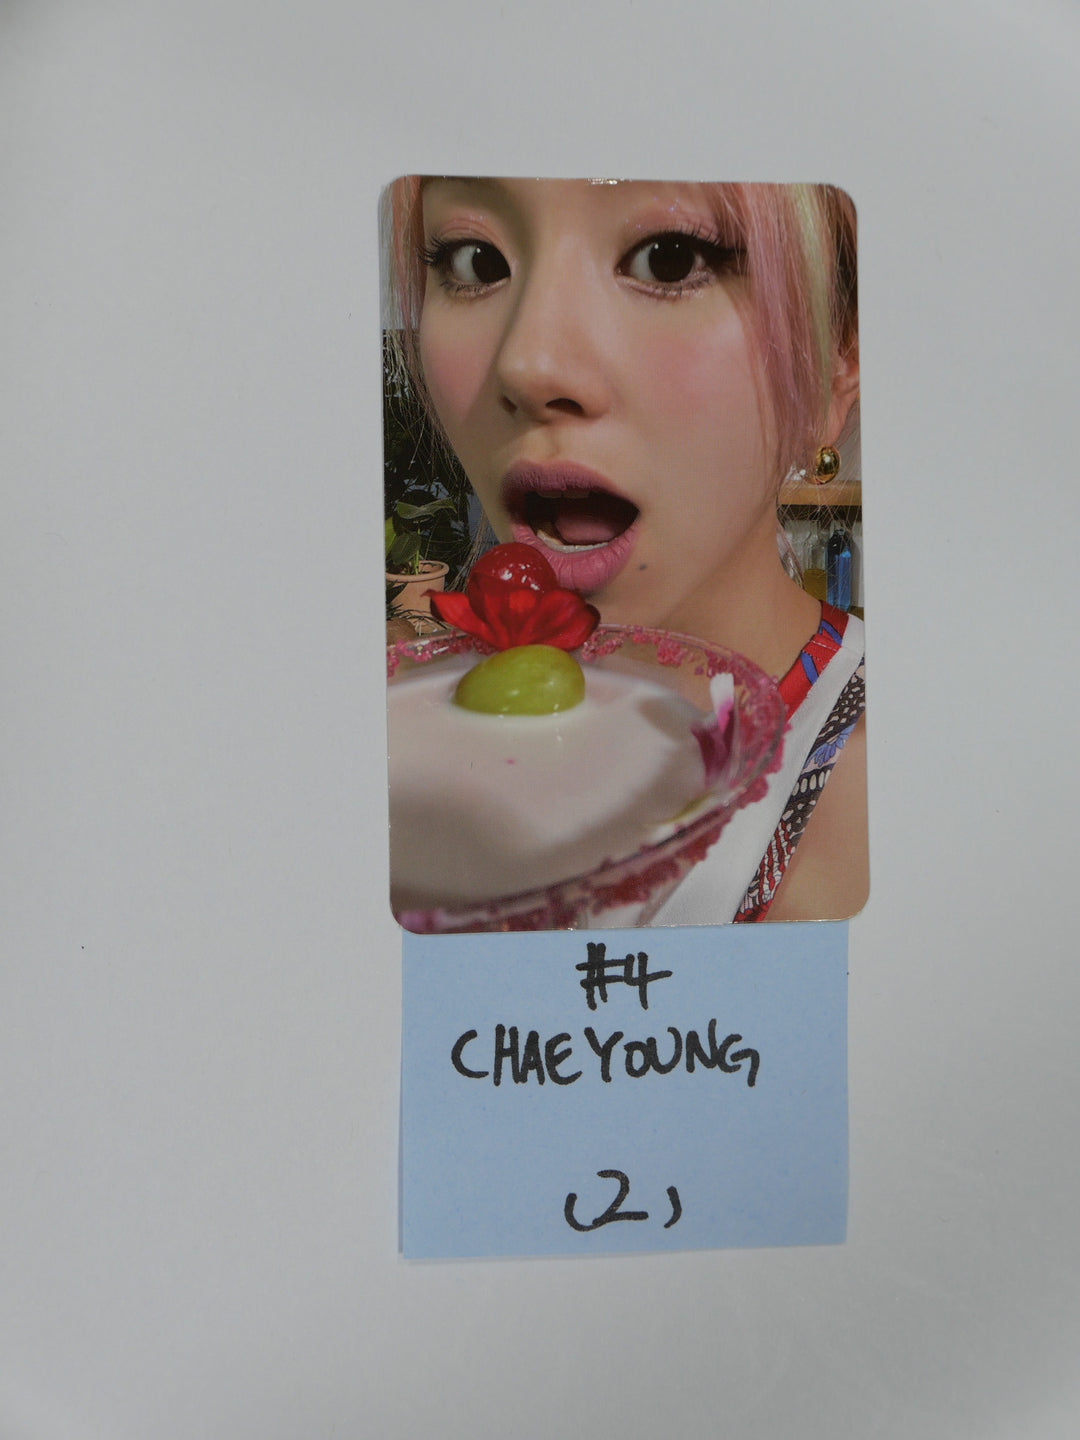 Twice 'Taste Of Love' - Official Photocard [ DAHYUN  & CHAEYOUNG & TZUYU ]